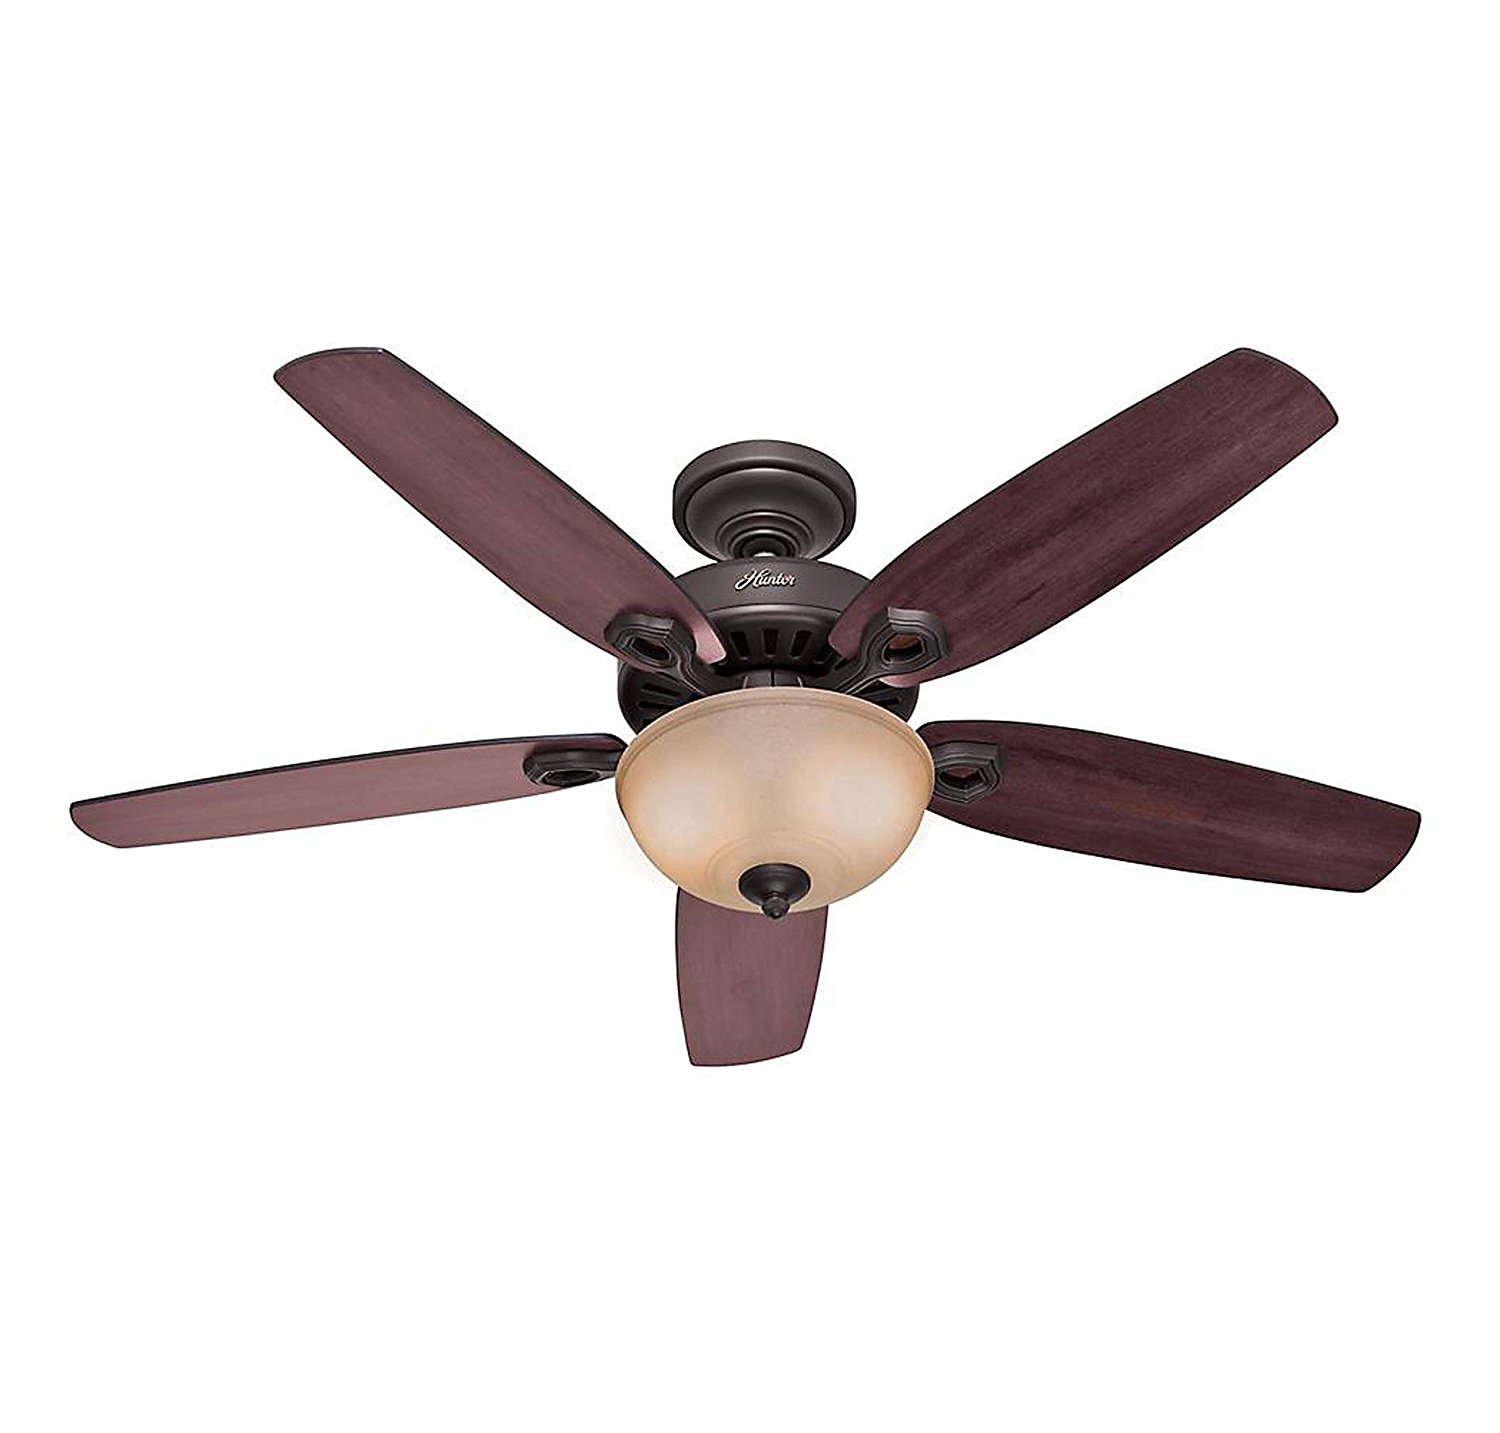 Hunter 53091 Builder Deluxe 5-Blade Single Light Ceiling Fan with Brazilian Cherry/Stained Oak Blades and Piped Toffee Glass Light Bowl, 52-Inch, New Bronze